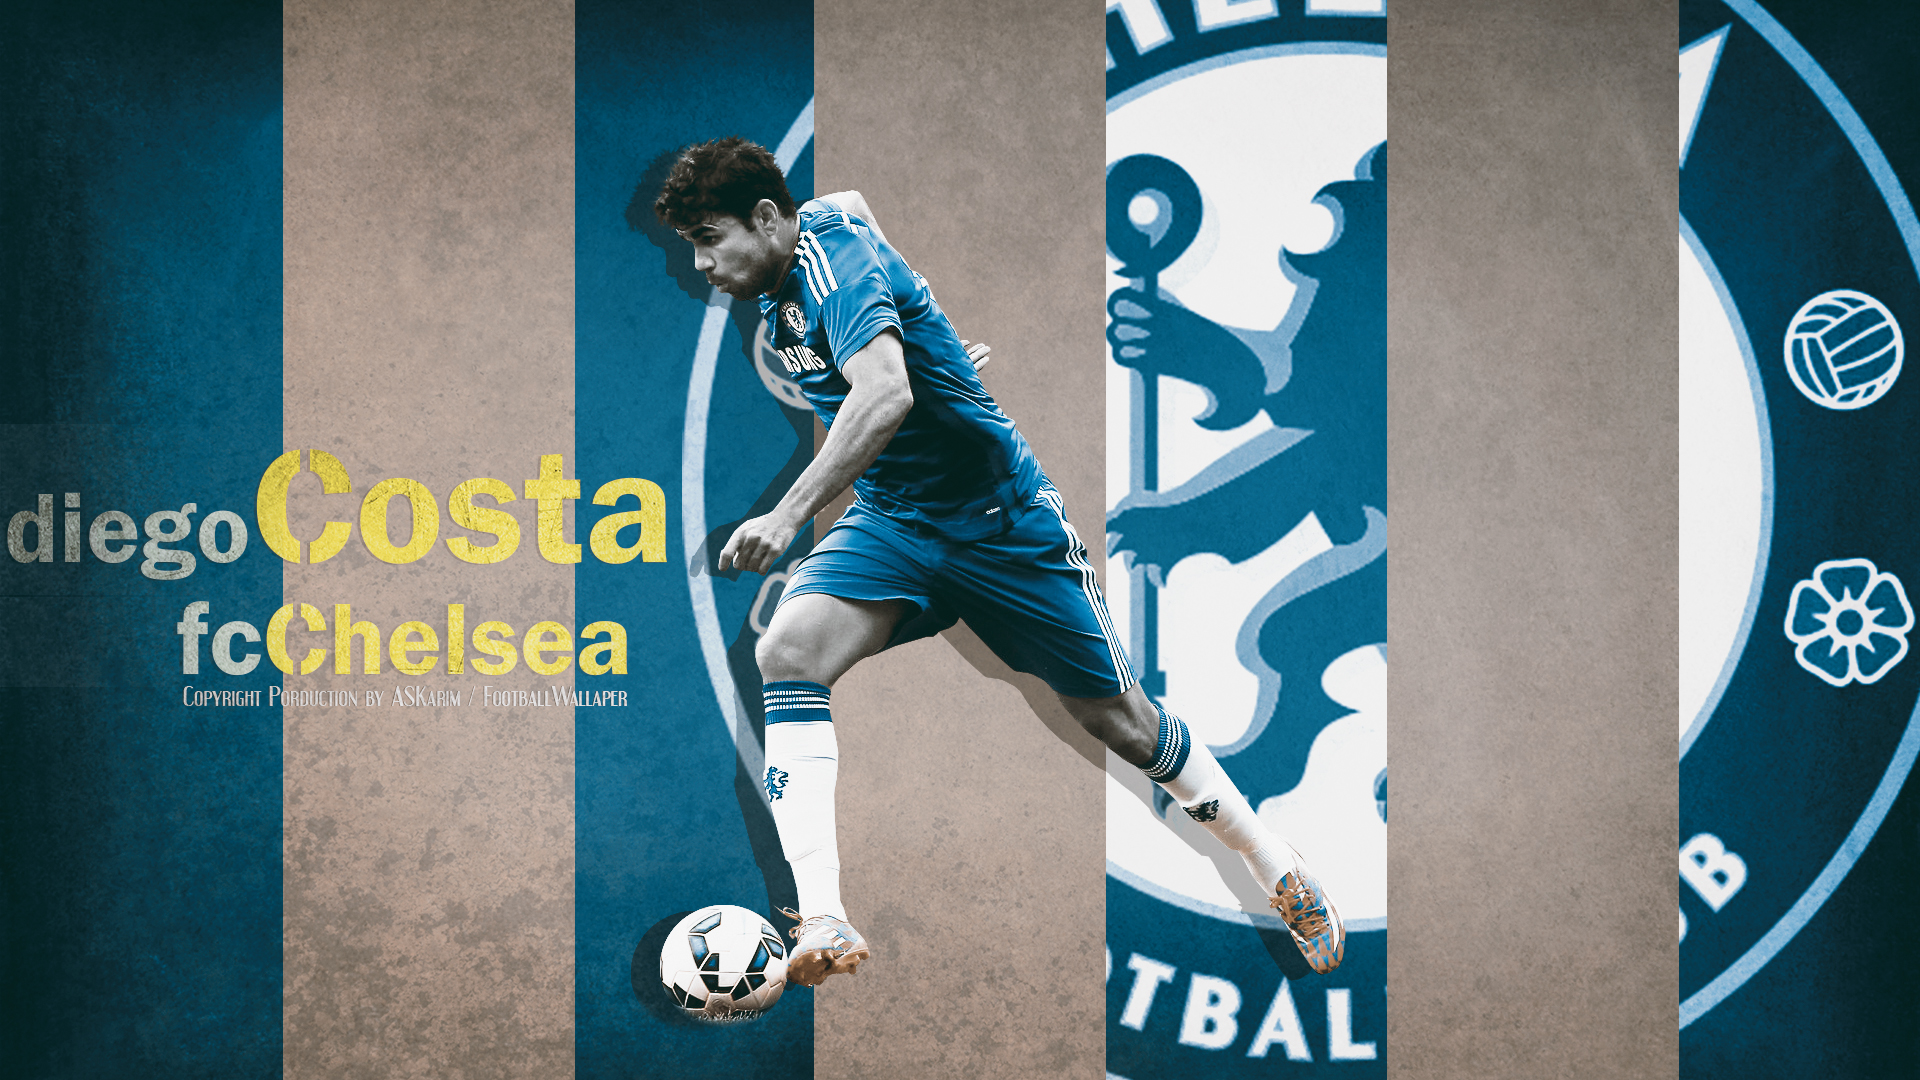 Diego Costa Wallpaper Pictures